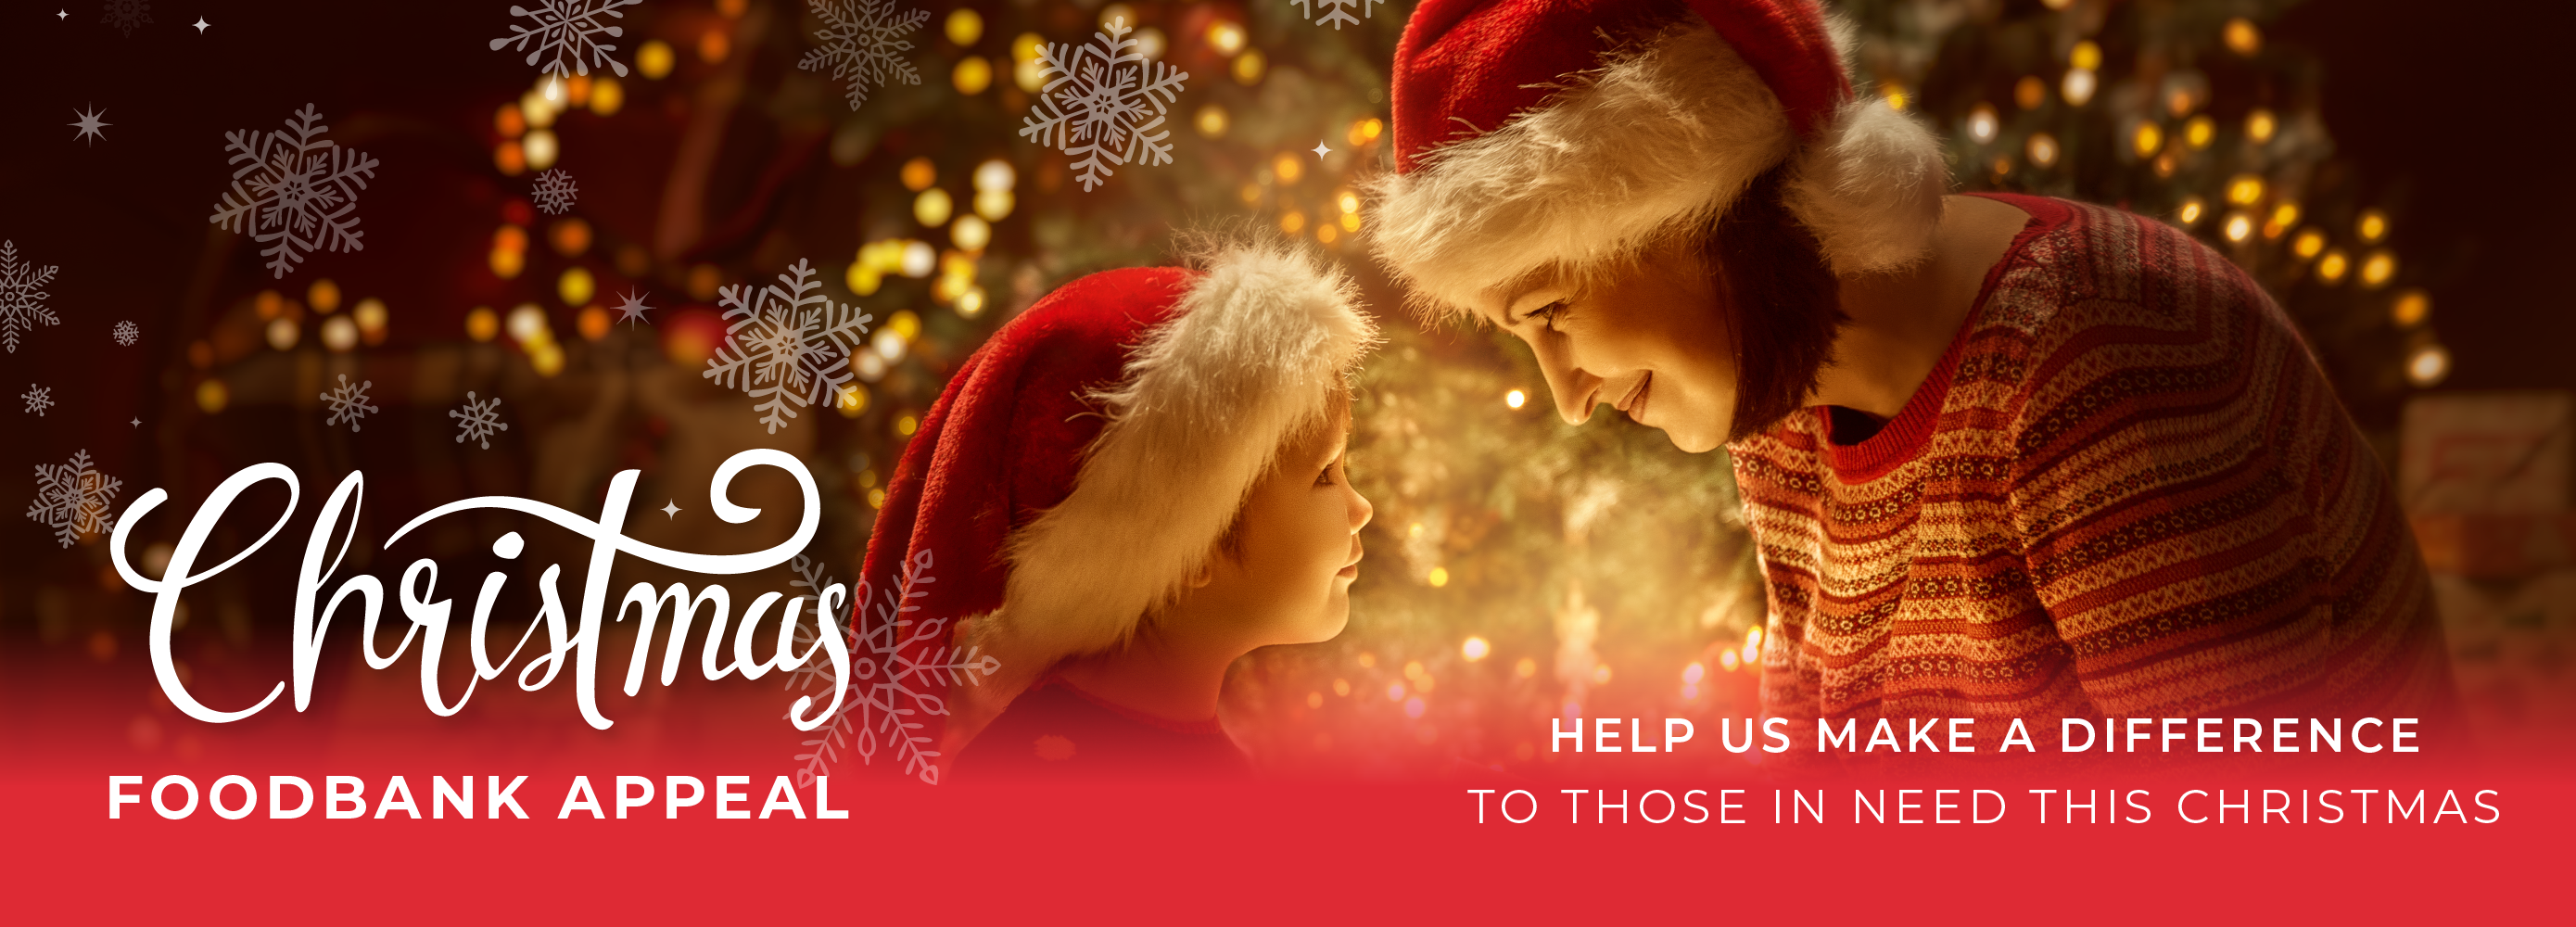 Help us make a difference to those in need this Christmas